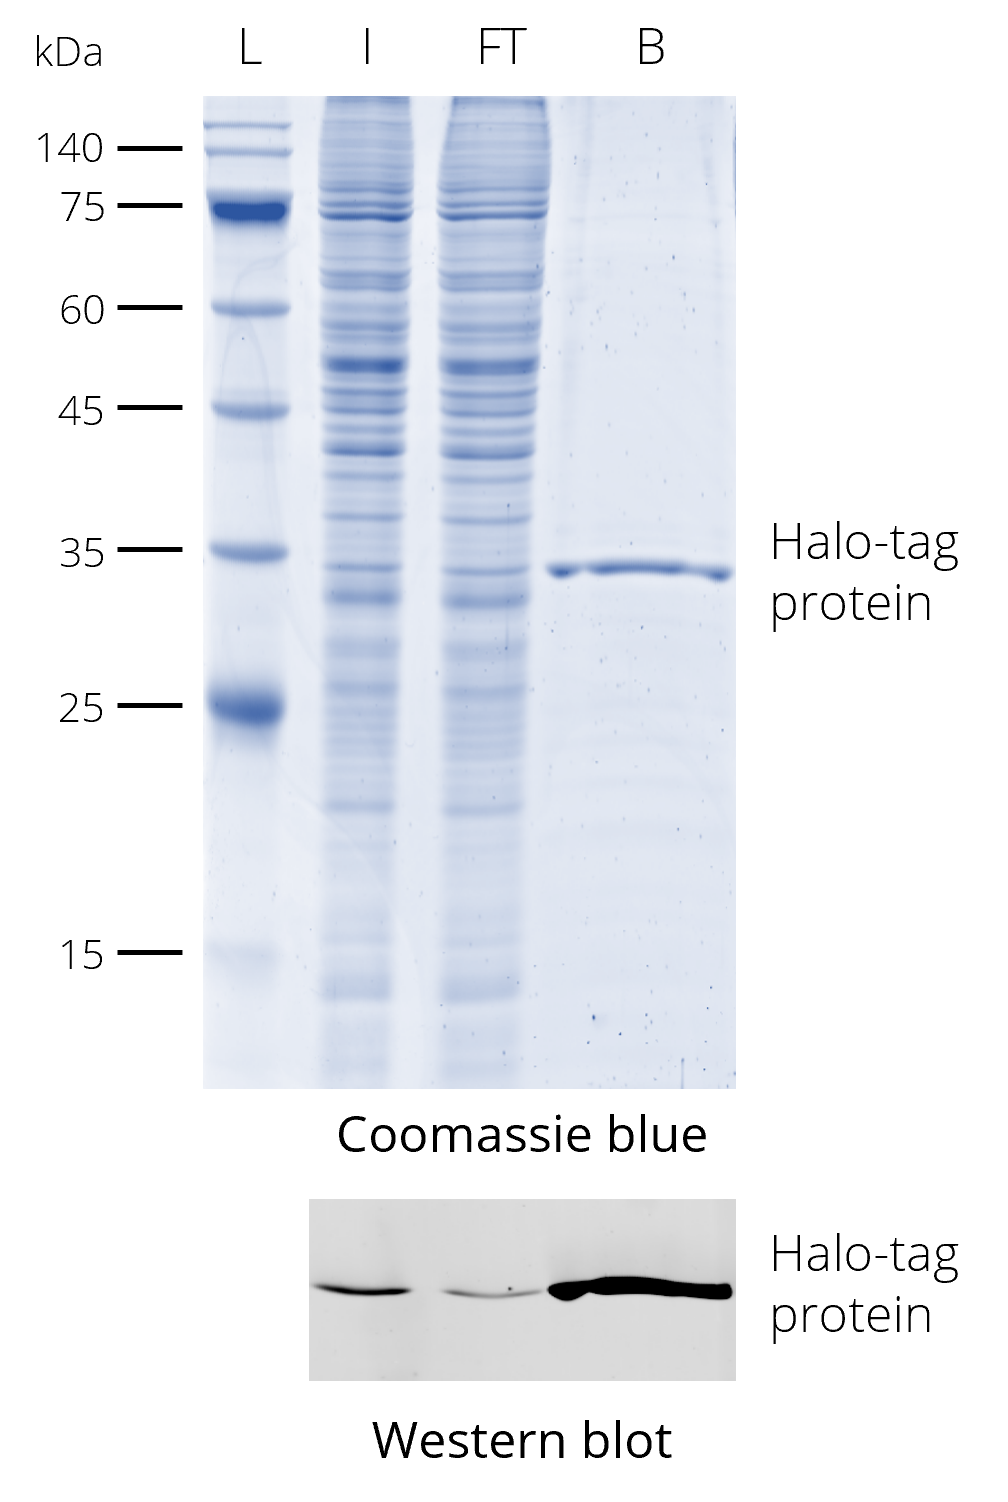 Halo-Trap Magnetic Particles M-270 was used for immunoprecipitation of Halo-tag protein from HEK293T cell lysate and elution with 2x SDS-sample buffer. Coomassie blue staining shows elution of enriched Halo-tag protein. Western blot was probed with Halo antibody [28A8] (28a8) and Nano-Secondary® alpaca anti-mouse IgG1, recombinant VHH, Alexa Fluor® 488 [CTK0103, CTK0104] (sms1AF488-1). L: Prestained protein marker (Proteintech, PL00001), I: Input, FT: Flow-Through, B: Bound.